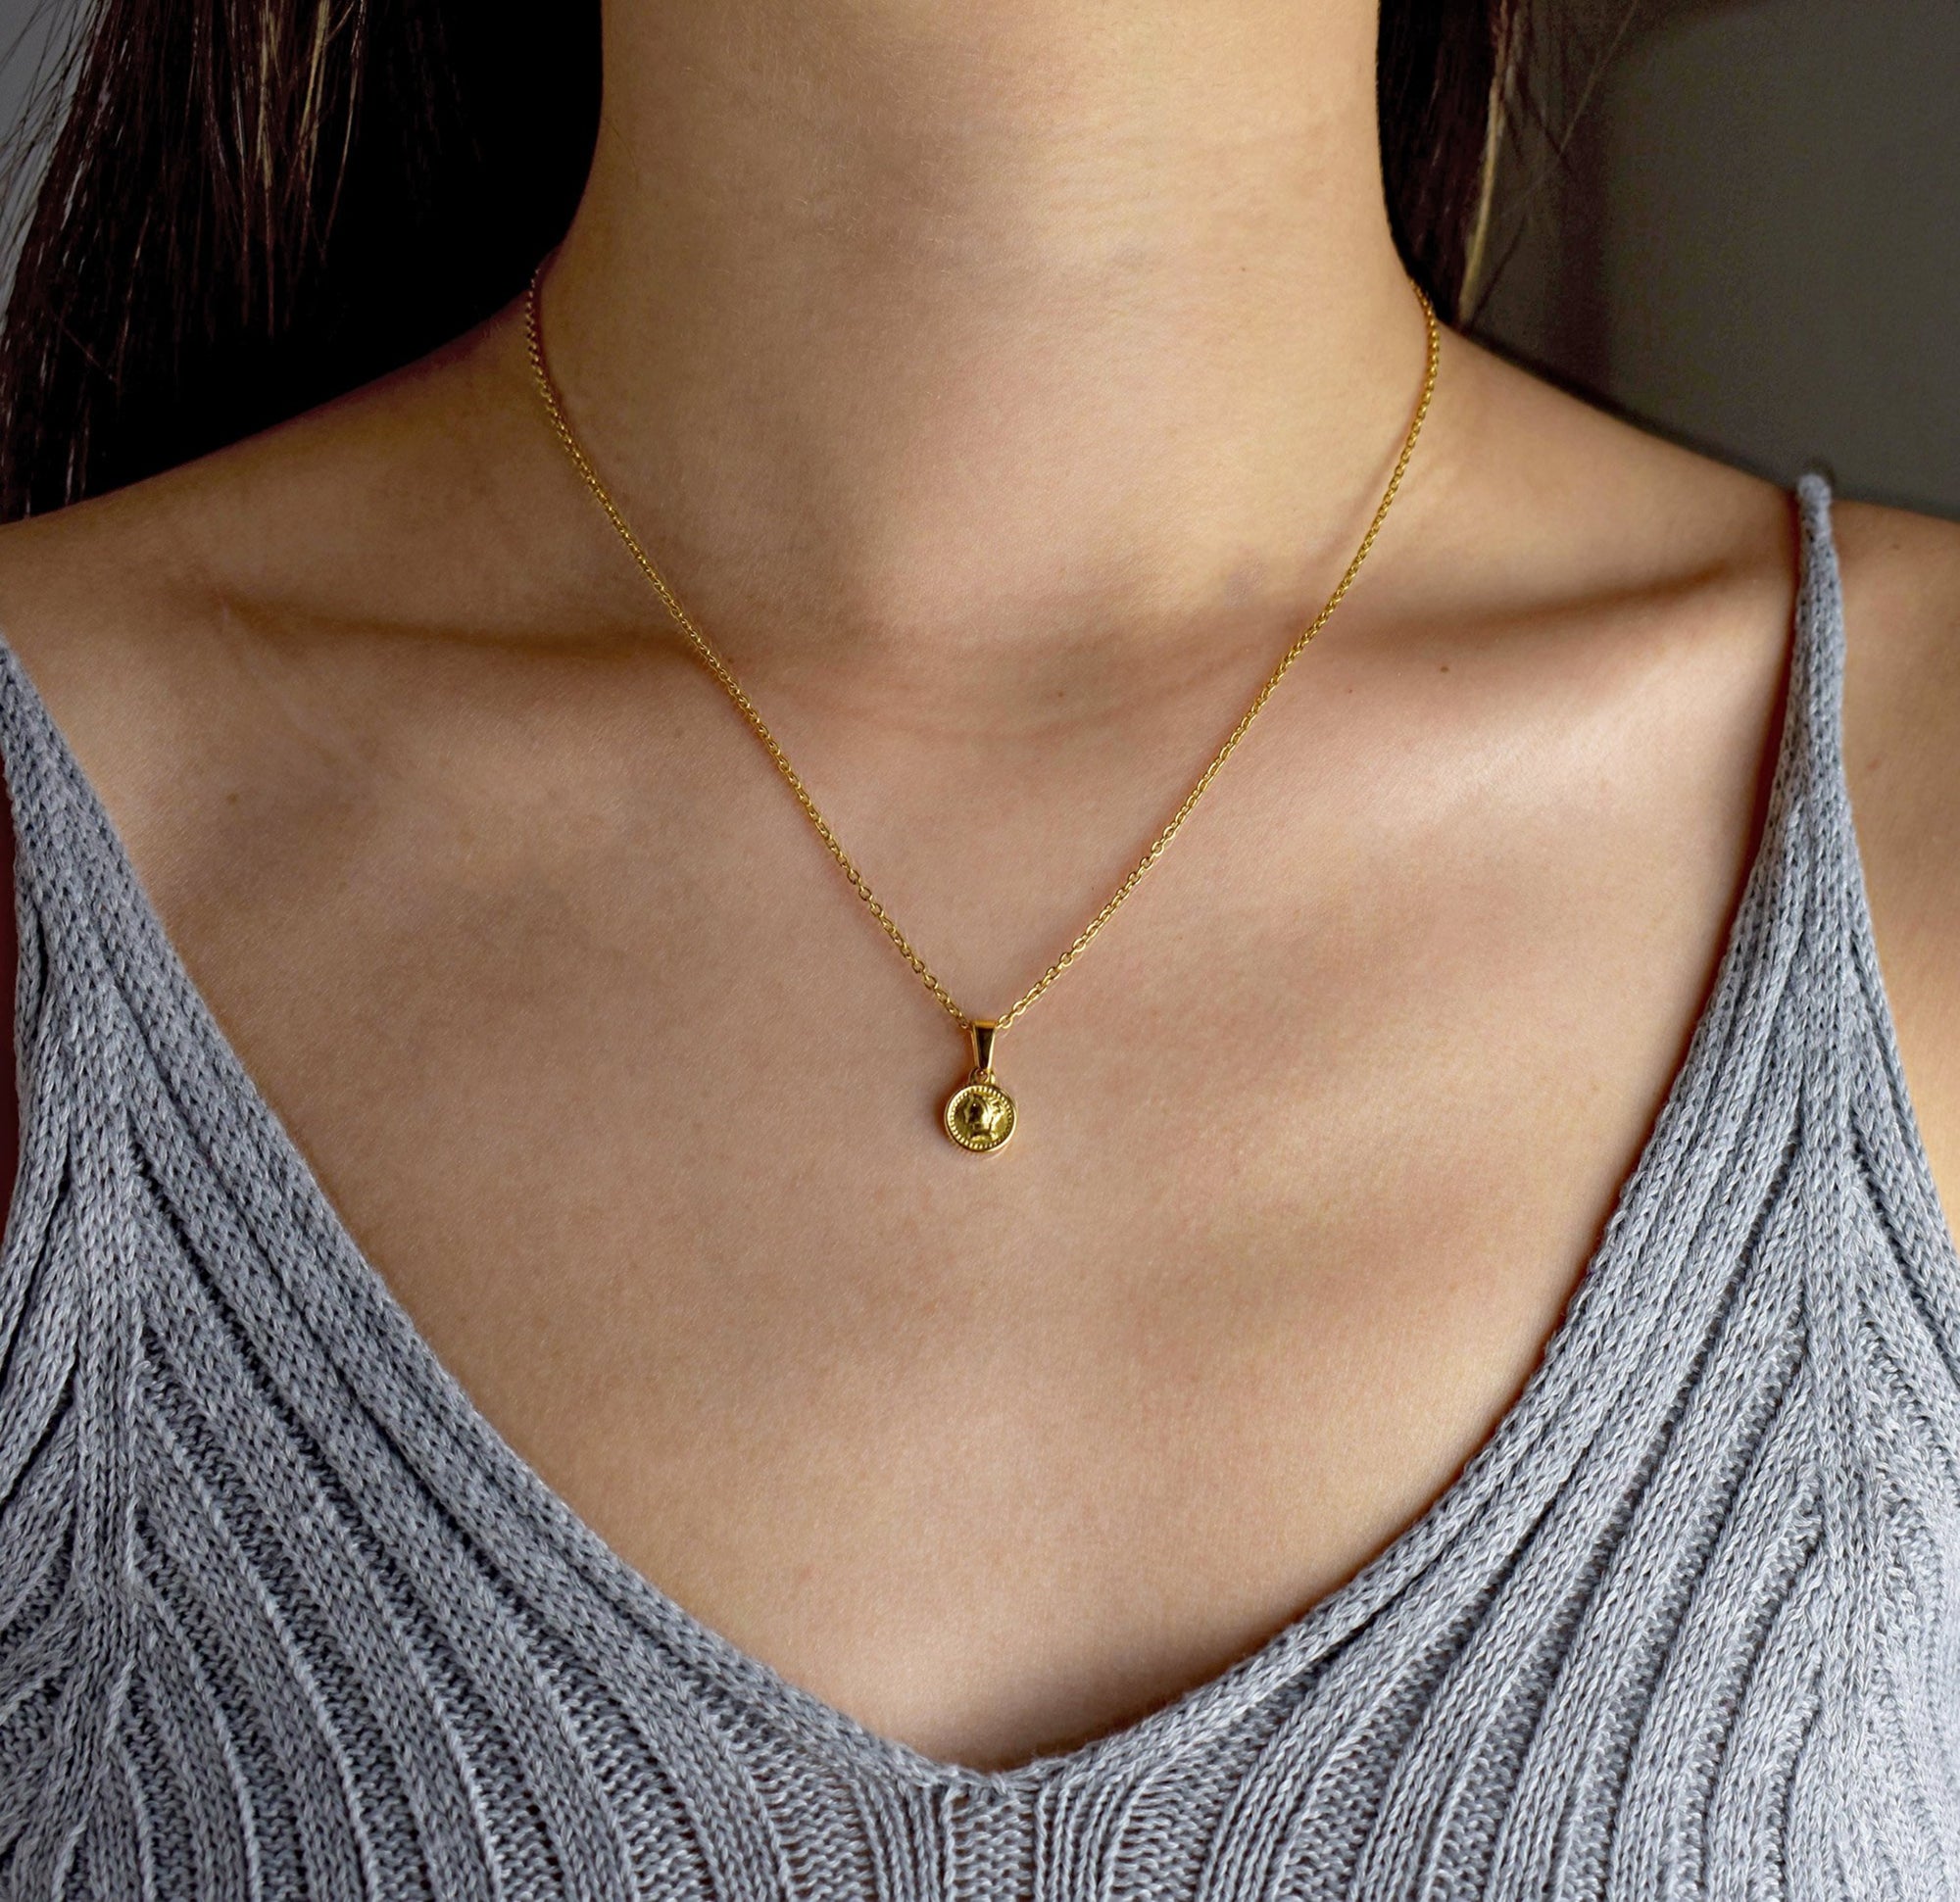 gold coin necklace waterproof jewelry